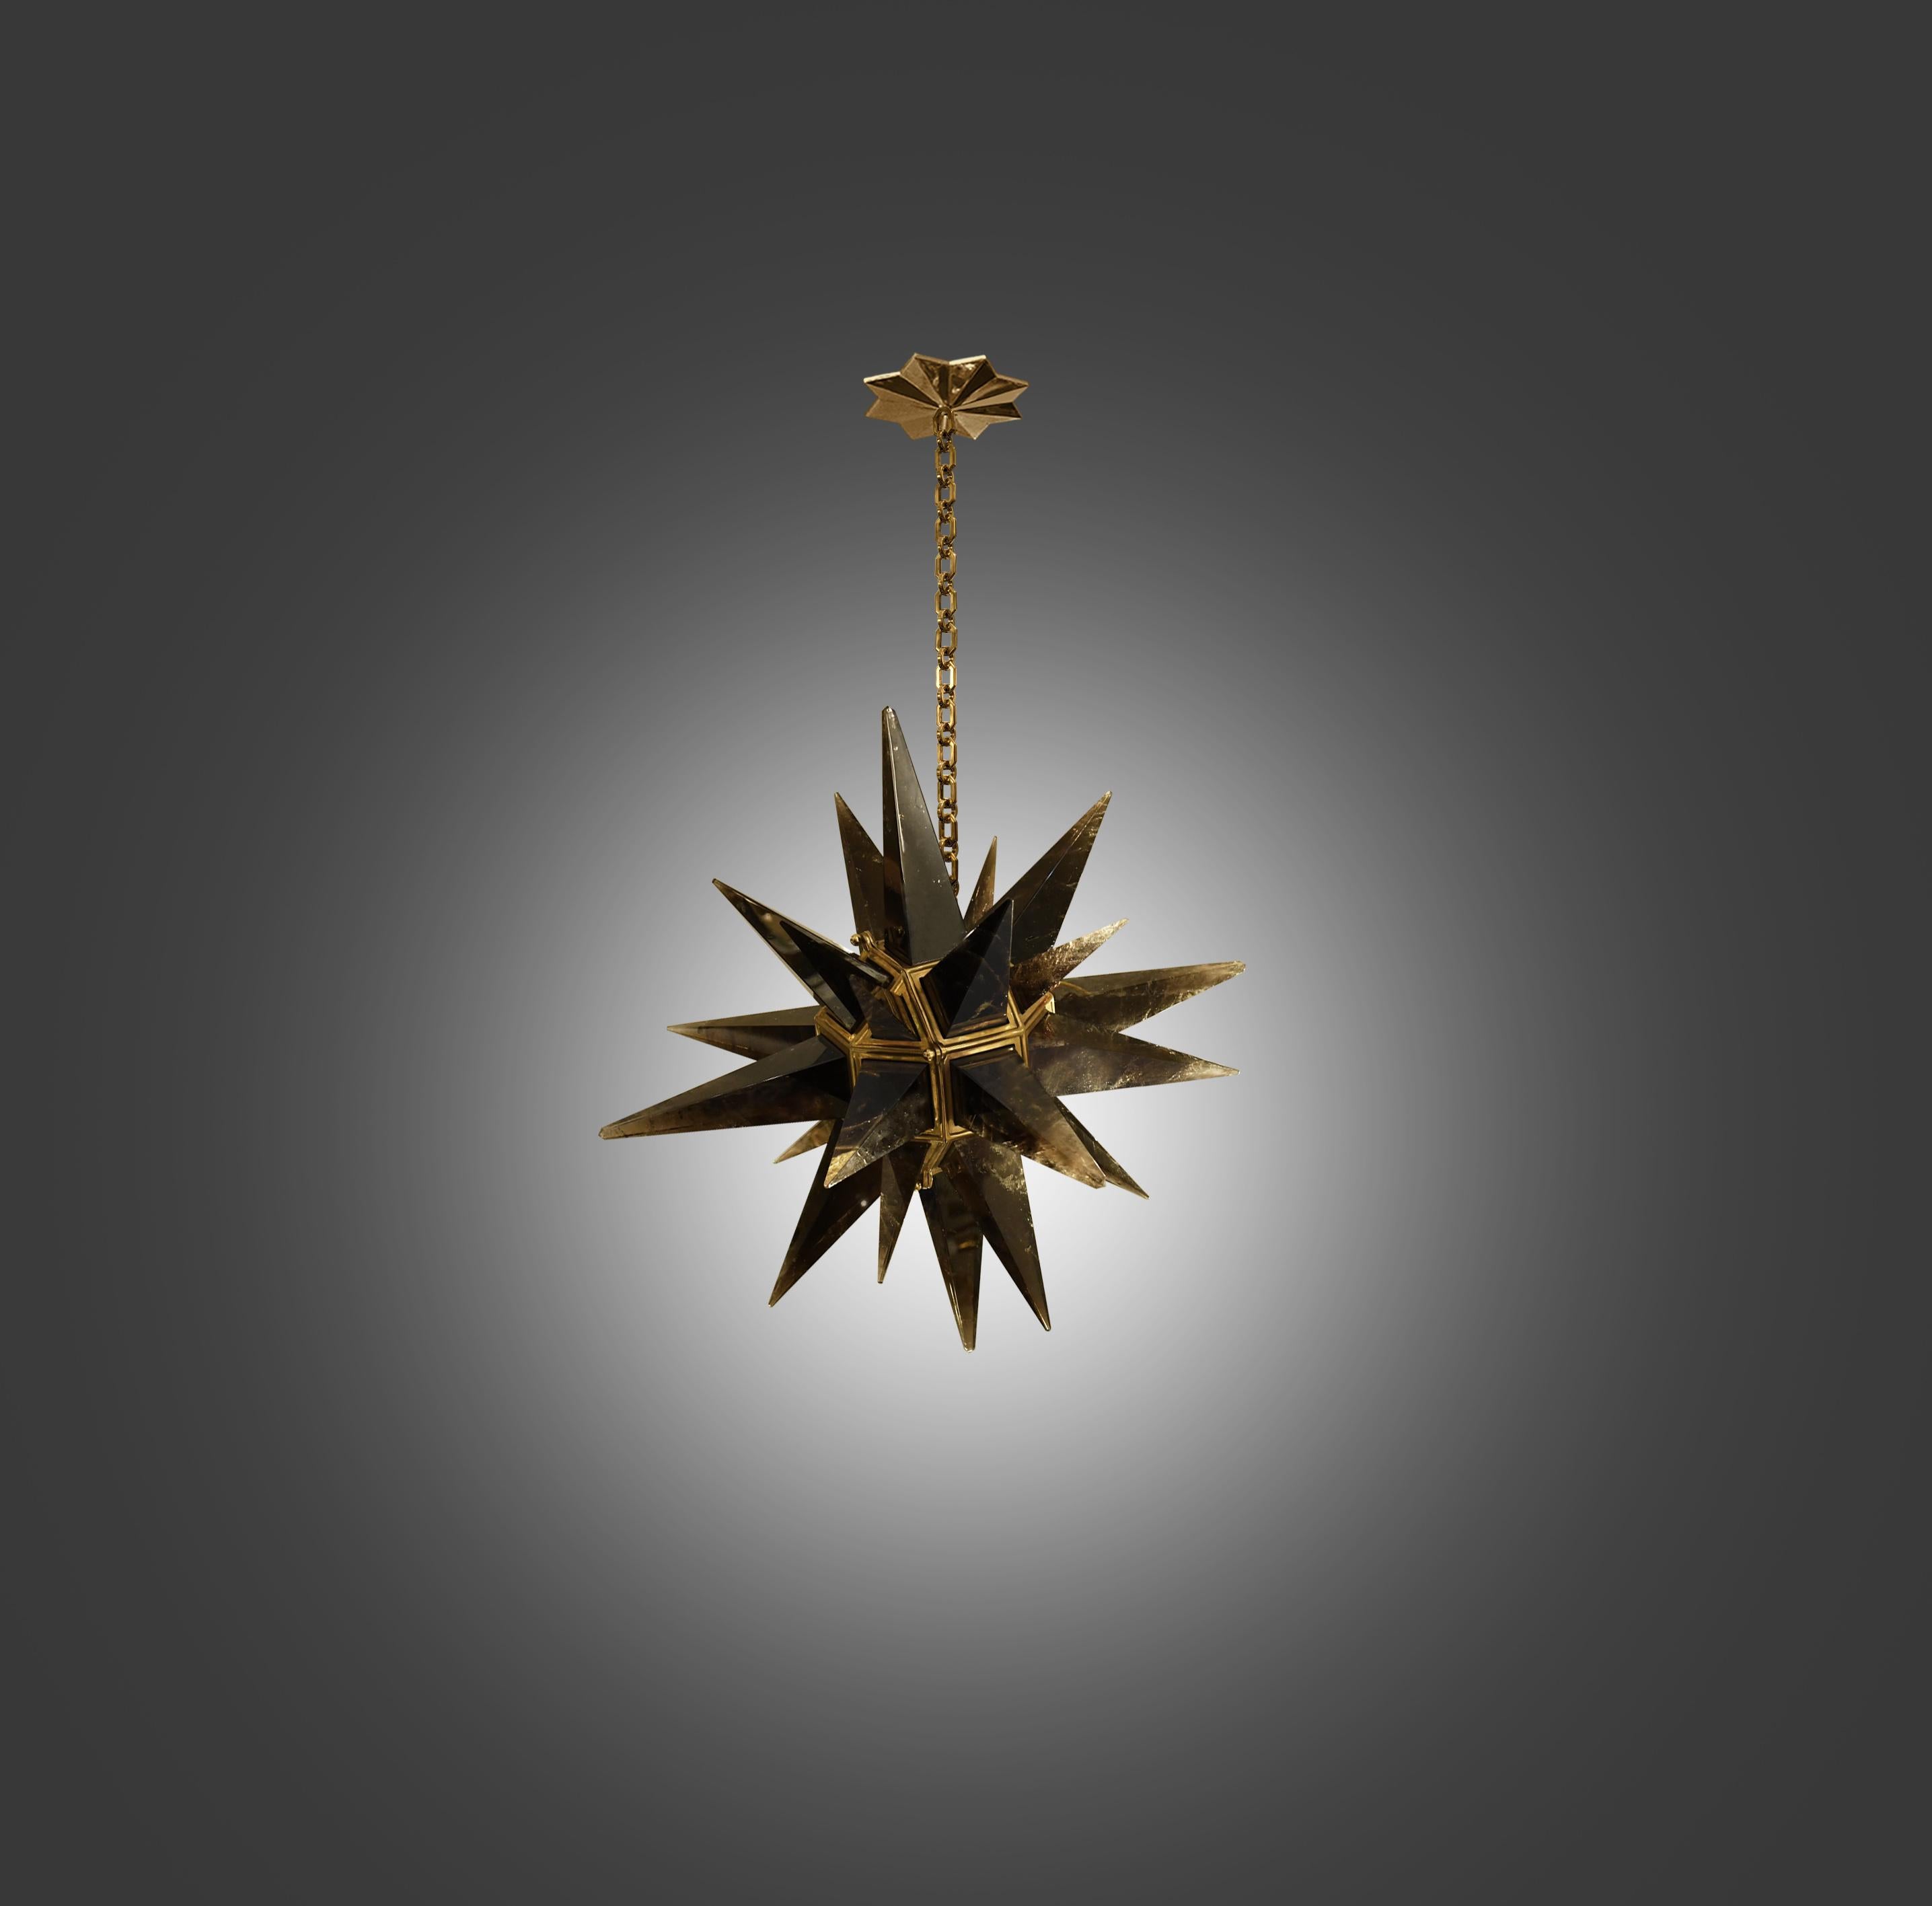 A modern dark brown rock crystal star chandelier with brass frame. Created by Phoenix Gallery, NYC.
The chandelier is 30